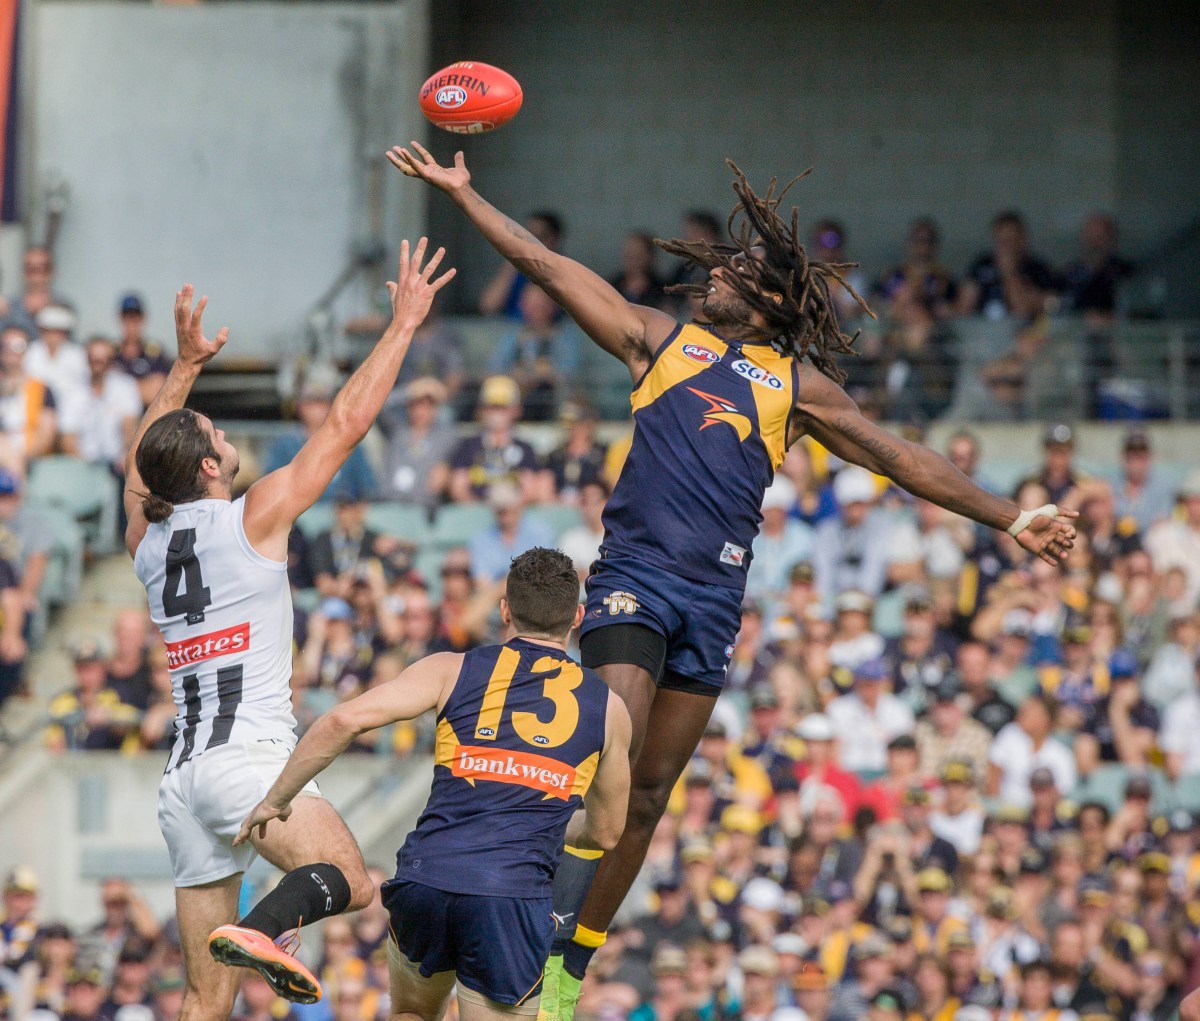 Brodie Grundy of Collingwood and Nic Naitanui of the West Coast Eagles during the round 6 AFL match between the West Coast Eagles and the Collingwood Magpies at Domain Stadium in Perth, Sunday, May 1, 2016. (AAP Image/Tony McDonough) NO ARCHIVING, EDITORIAL USE ONLYNLY